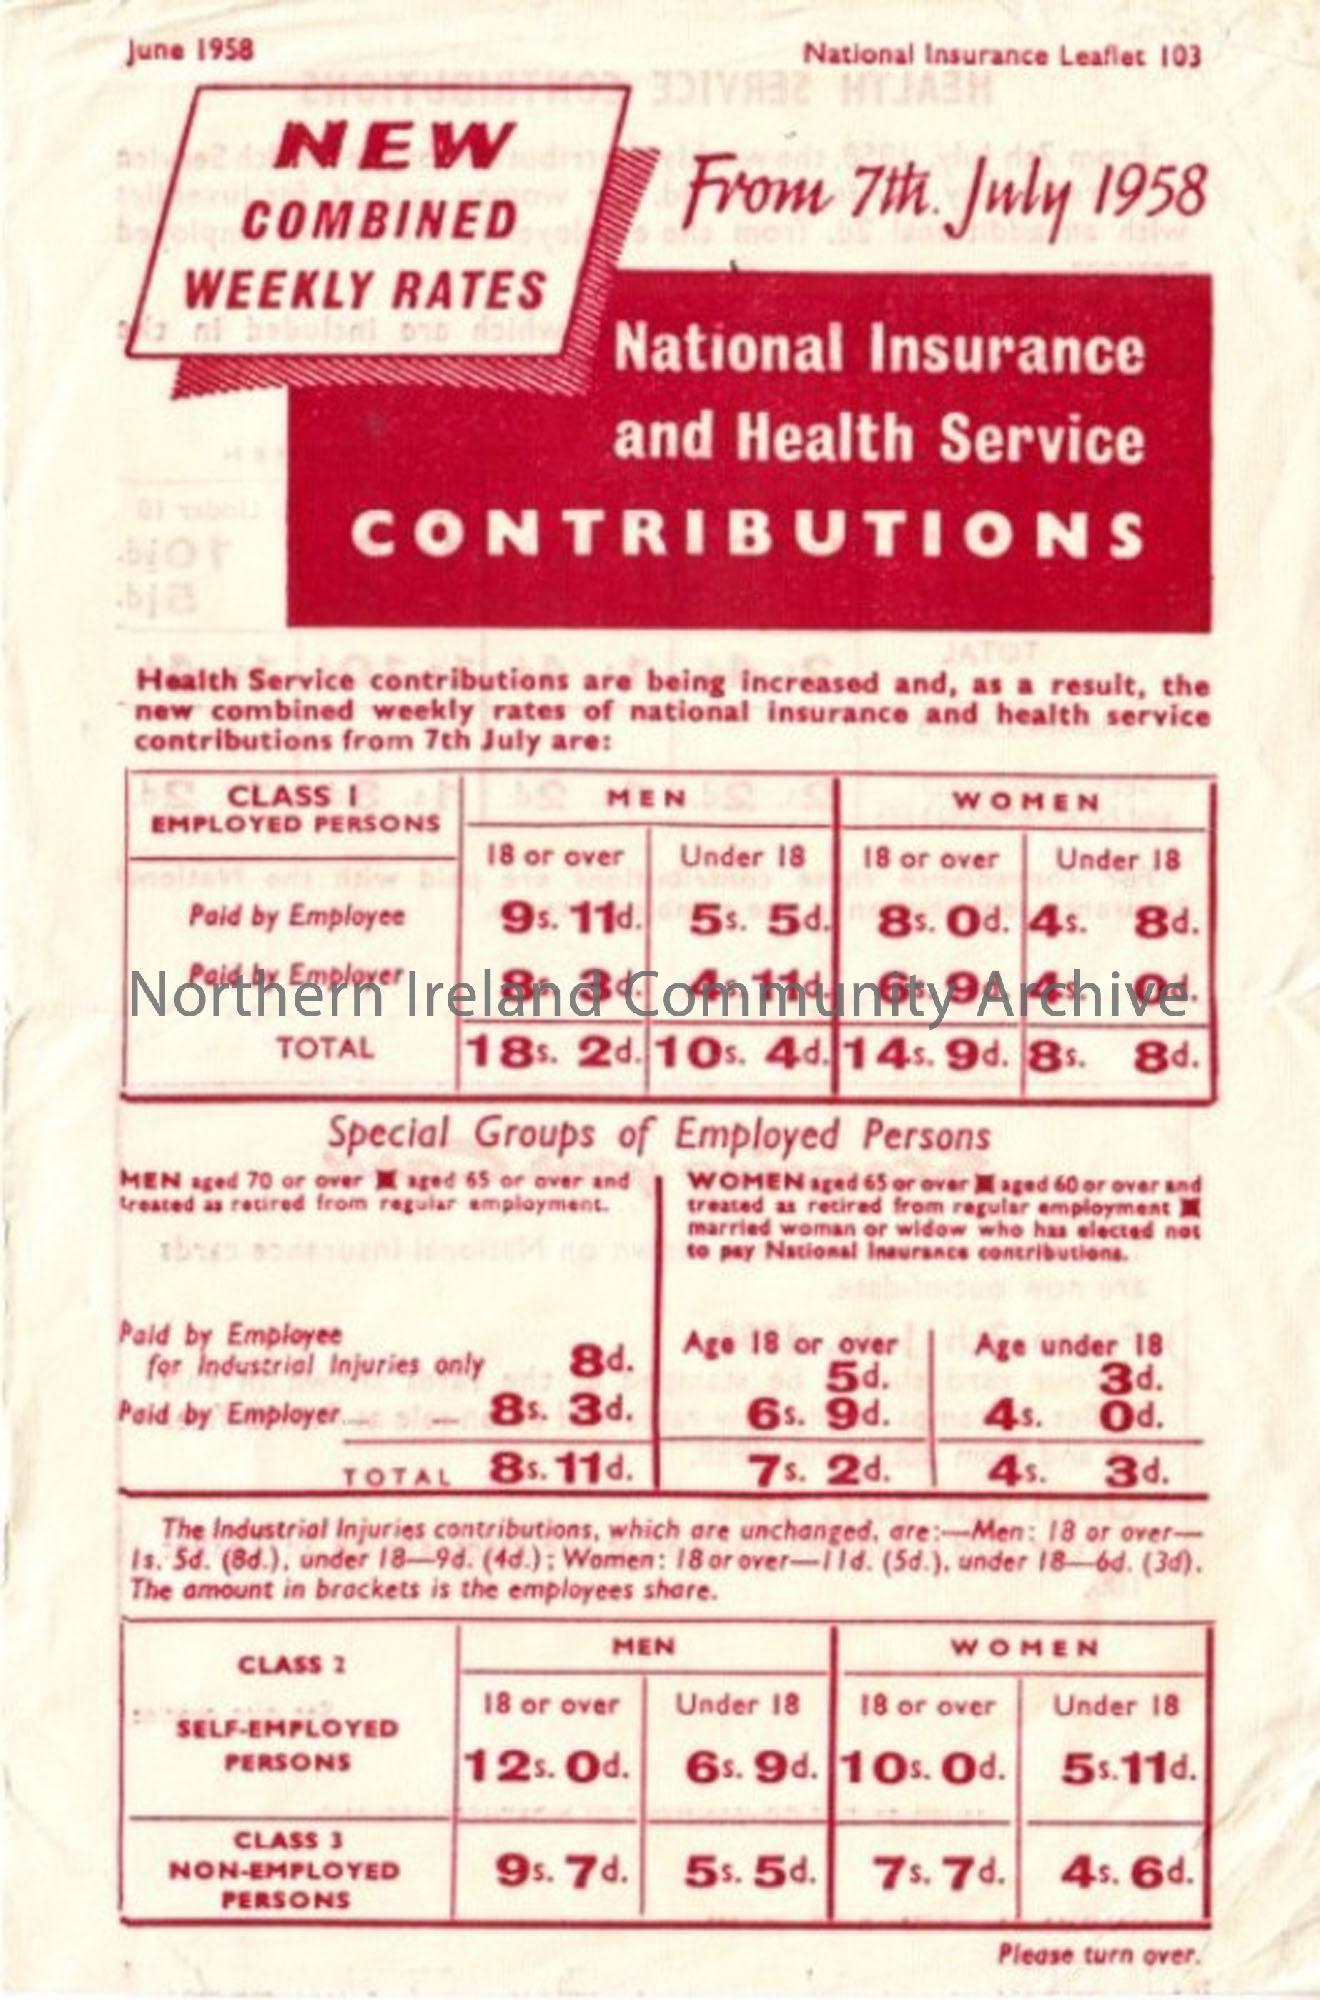 National Insurance leaflet, June 1958. Outlines contributions to be made.